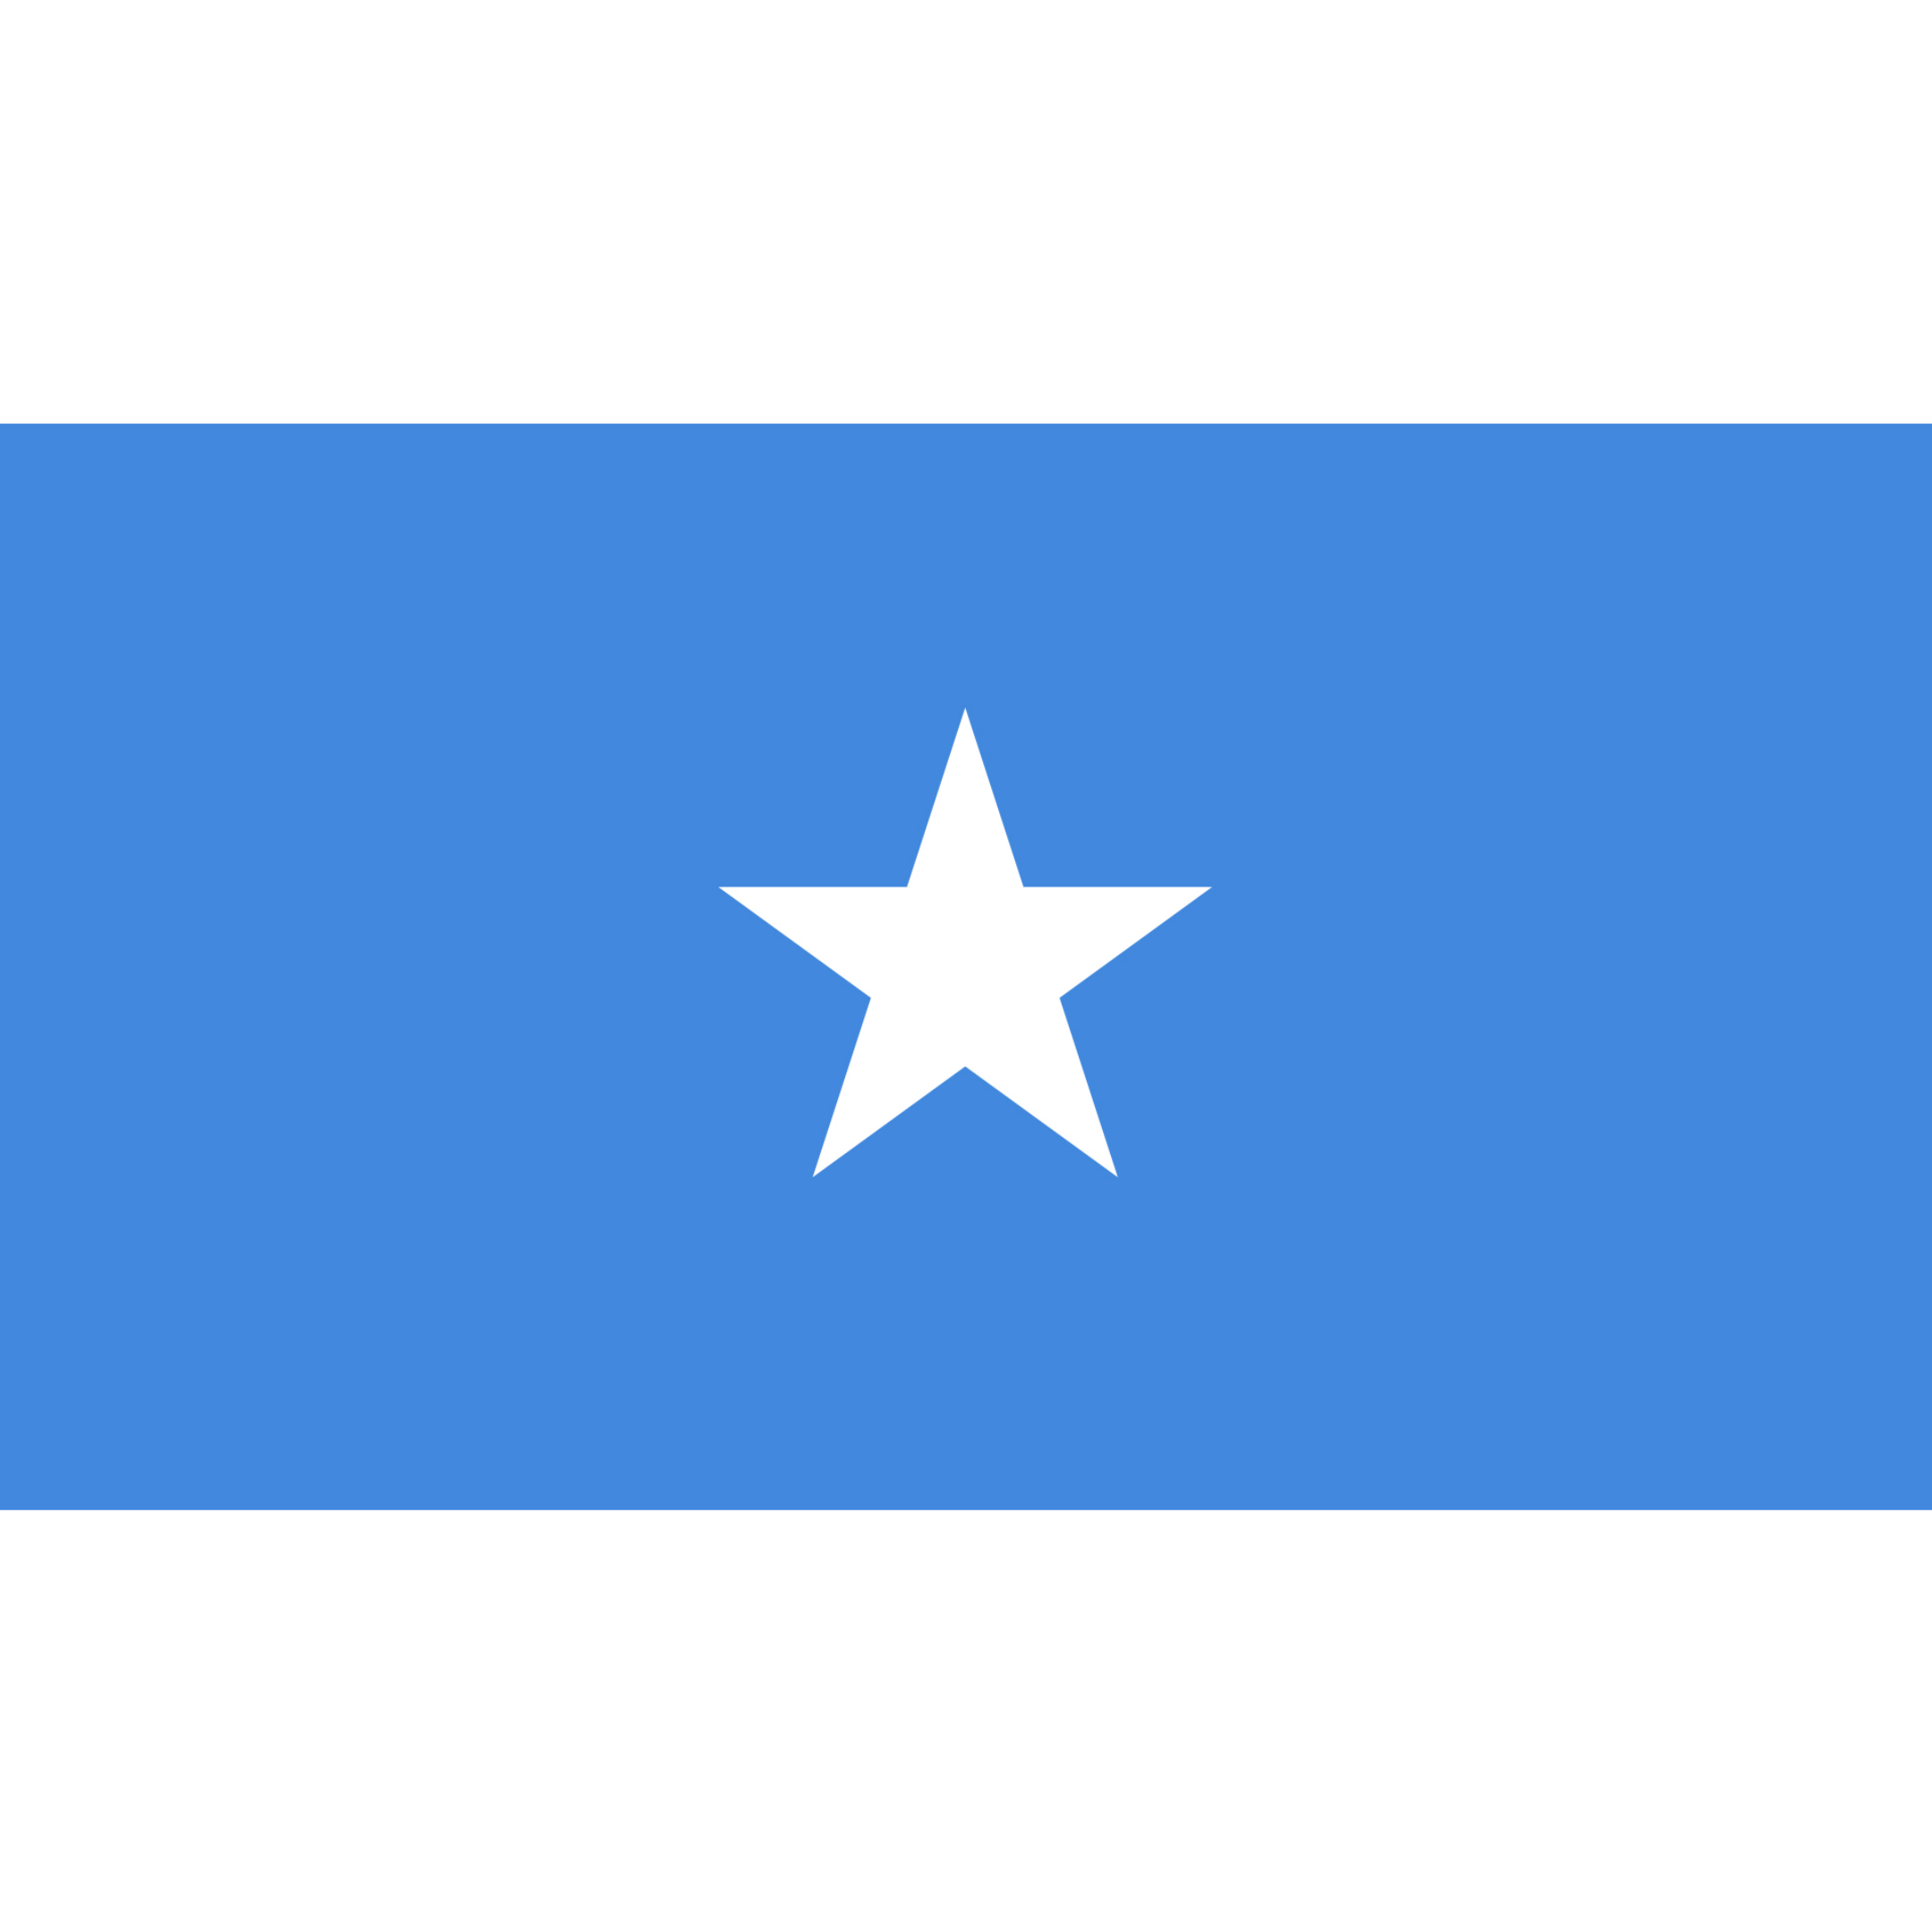 The flag of Somalia has a large five-pointed white star in the centre on a bright blue background.